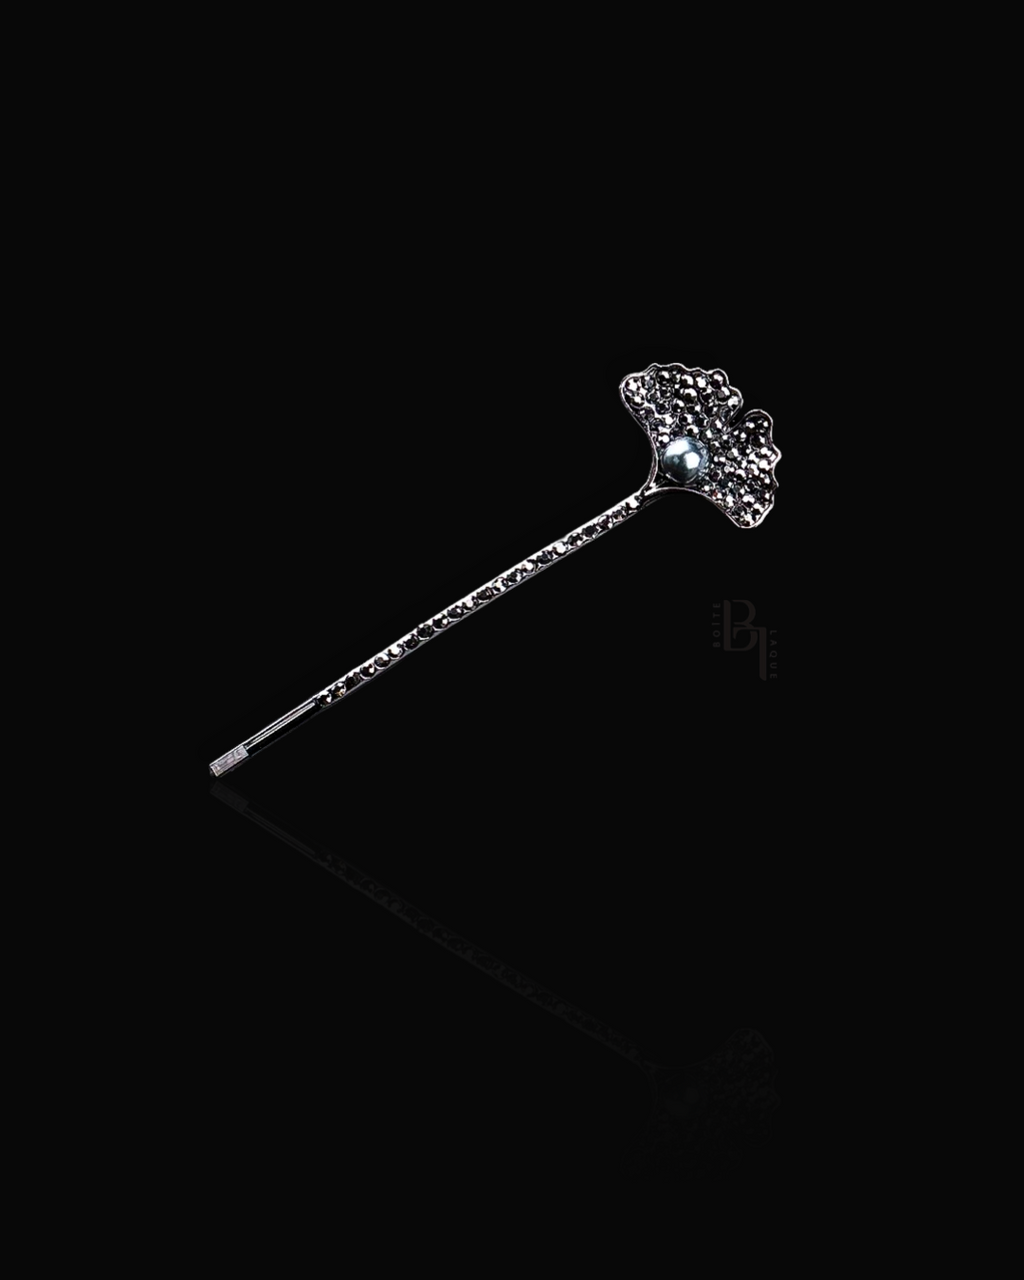 Gunmetal Ginkgo Pearl 14k White Gold Hair Pin with Set of Signature Silver Bobby Pins